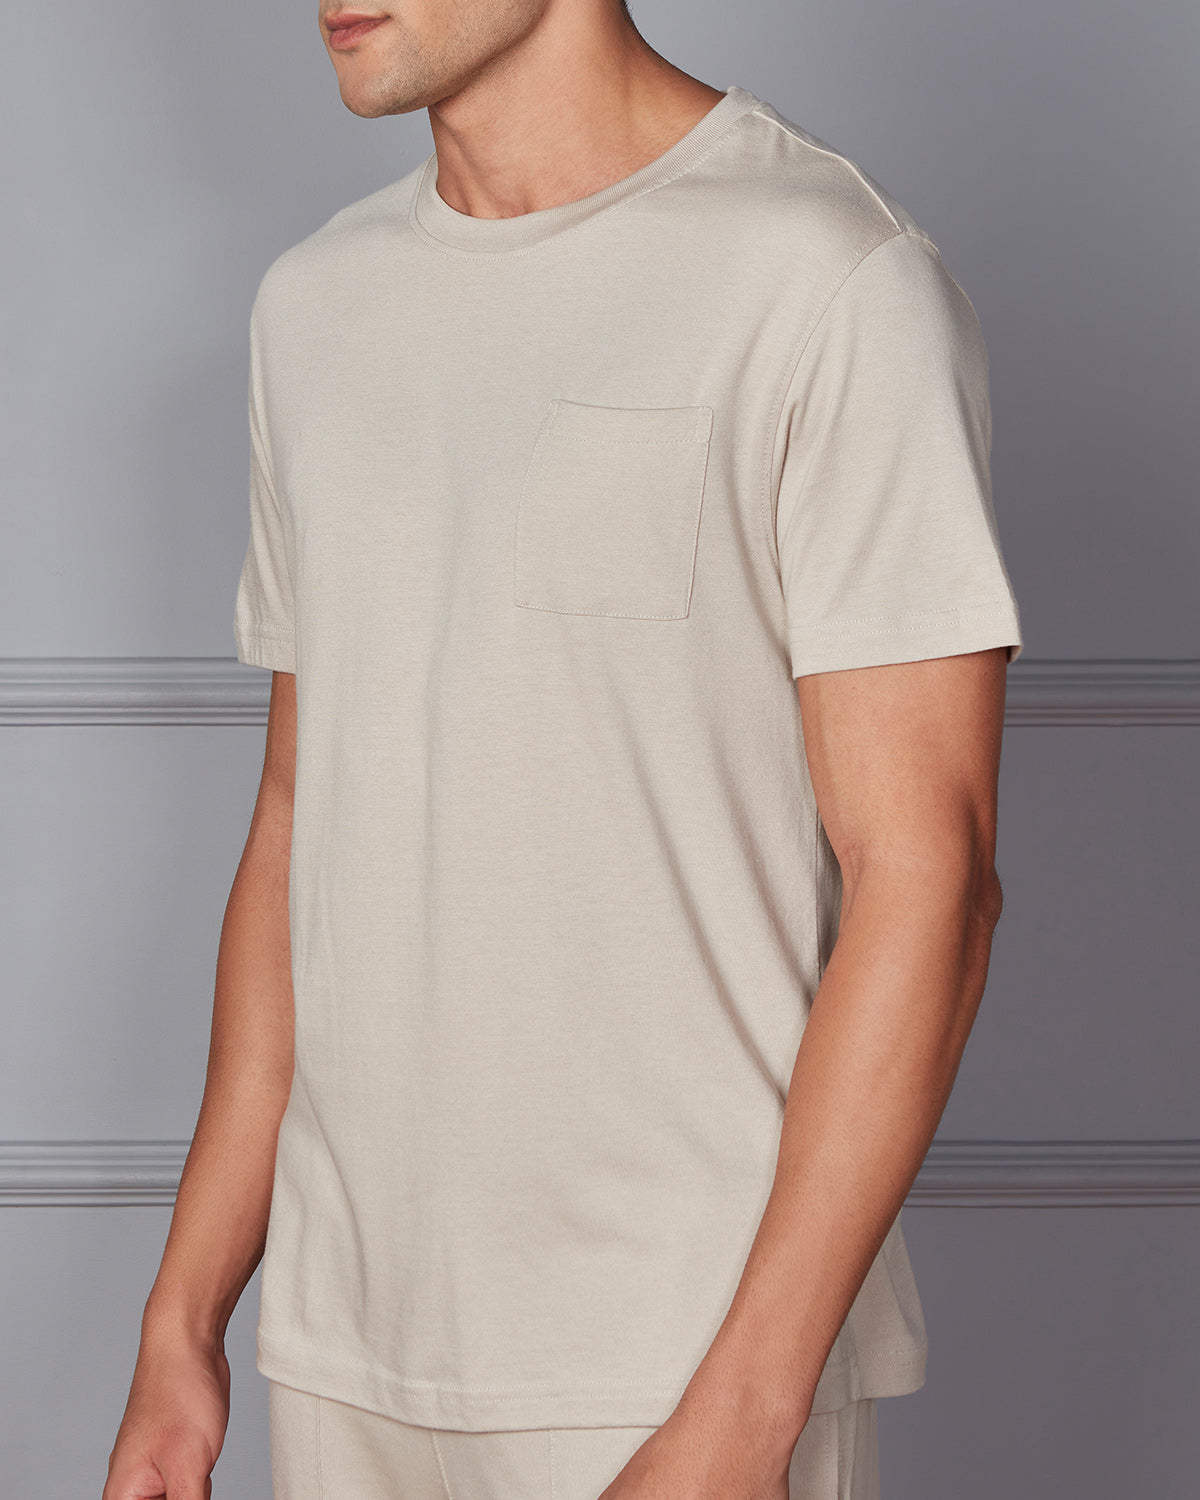 cityof_ - Luxe Square Pocket T-Shirt